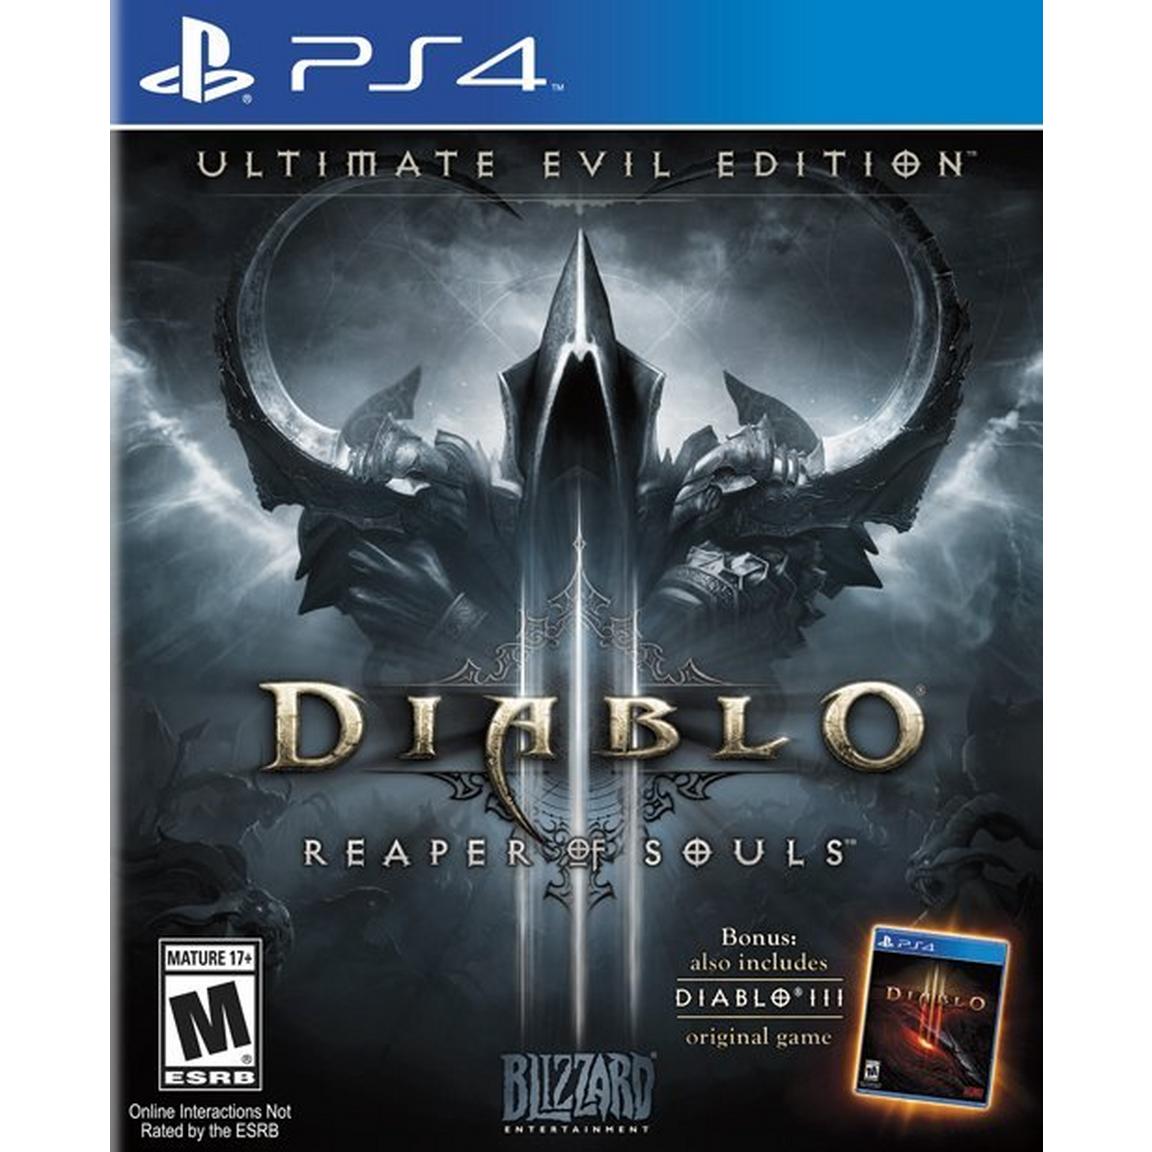 Diablo III: Reaper of Souls Ultimate Evil Edition - PlayStation 4, Pre-Owned -  Blizzard